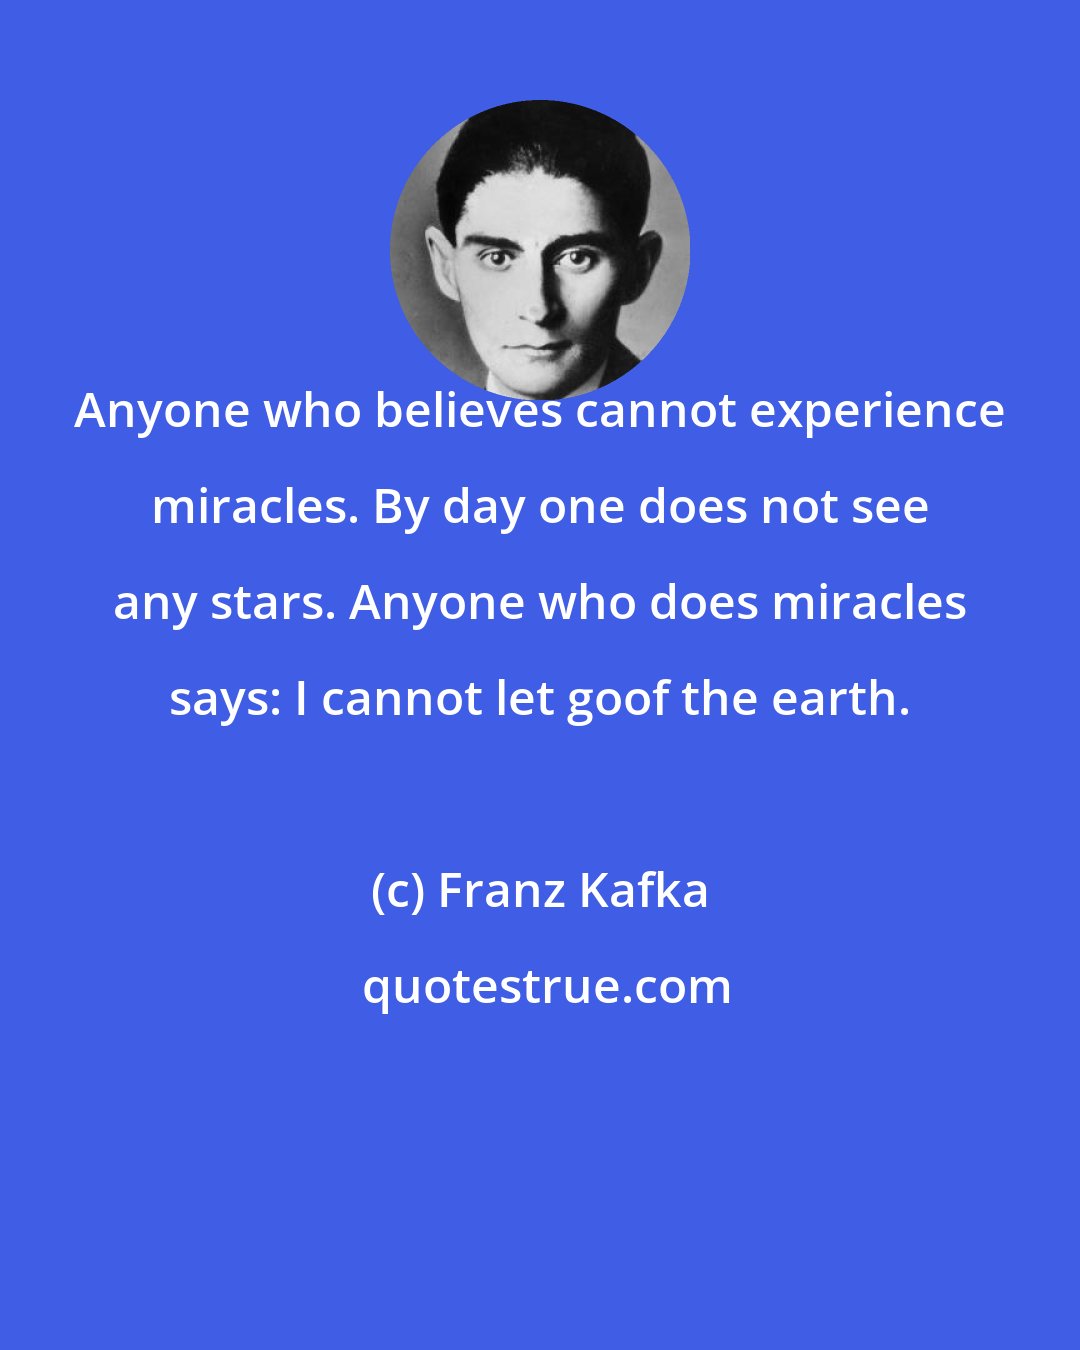 Franz Kafka: Anyone who believes cannot experience miracles. By day one does not see any stars. Anyone who does miracles says: I cannot let goof the earth.